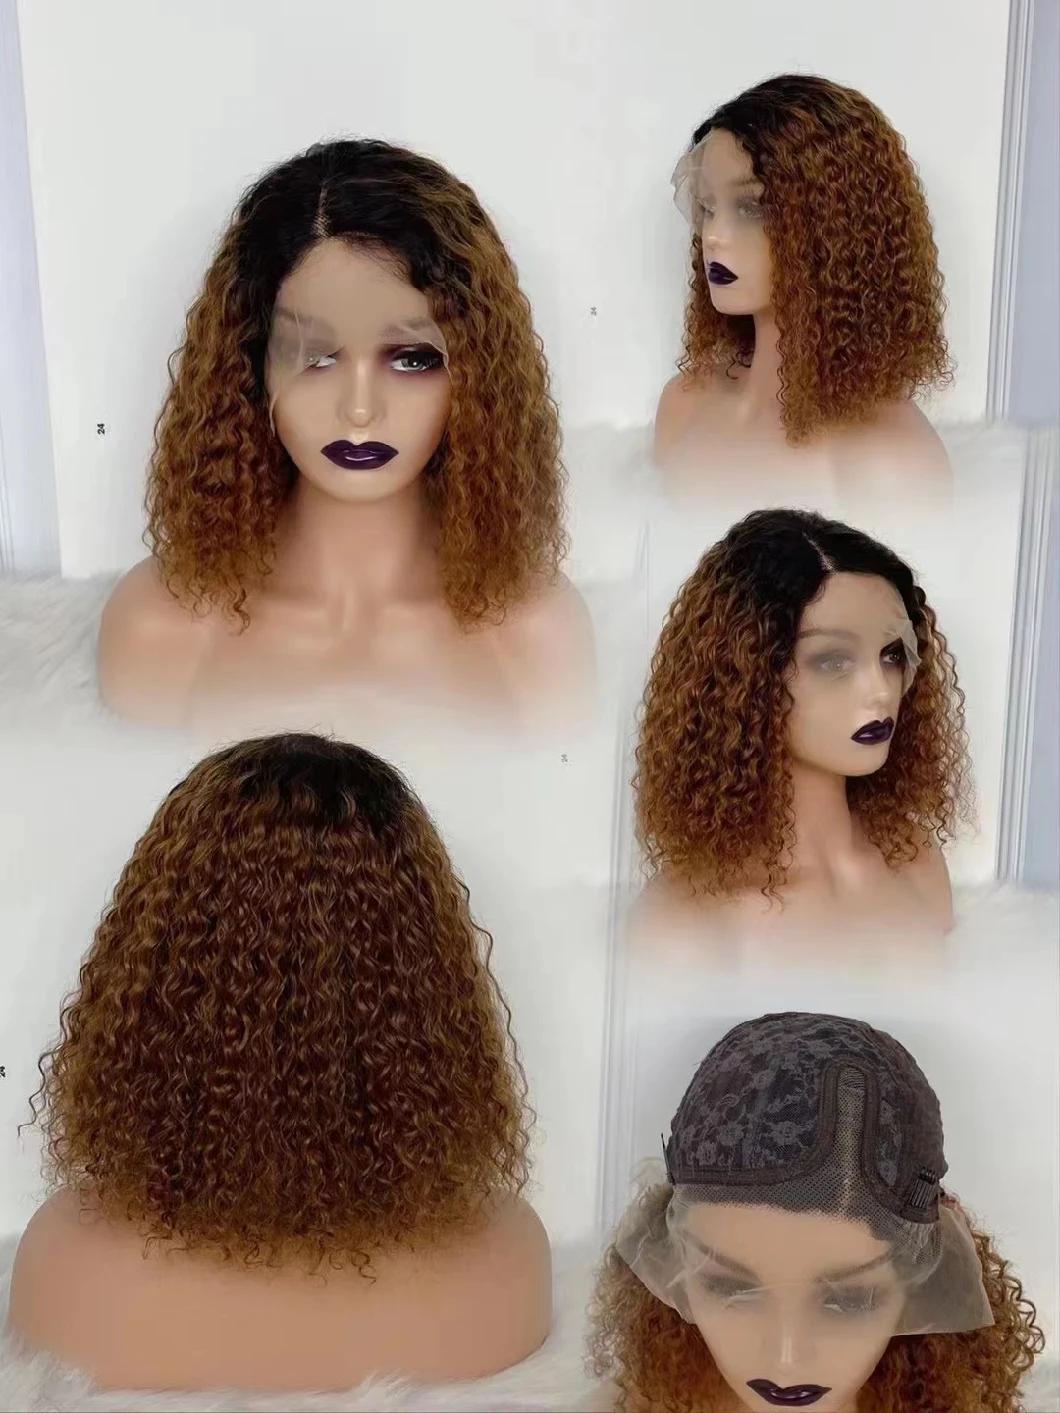 Wholesale Peruvian Bob Wigs Lace Front, High Quality 8-16 Inch Peruvian Bob Wig, Natural Virgin Remy Front Lace Wig Human Hair